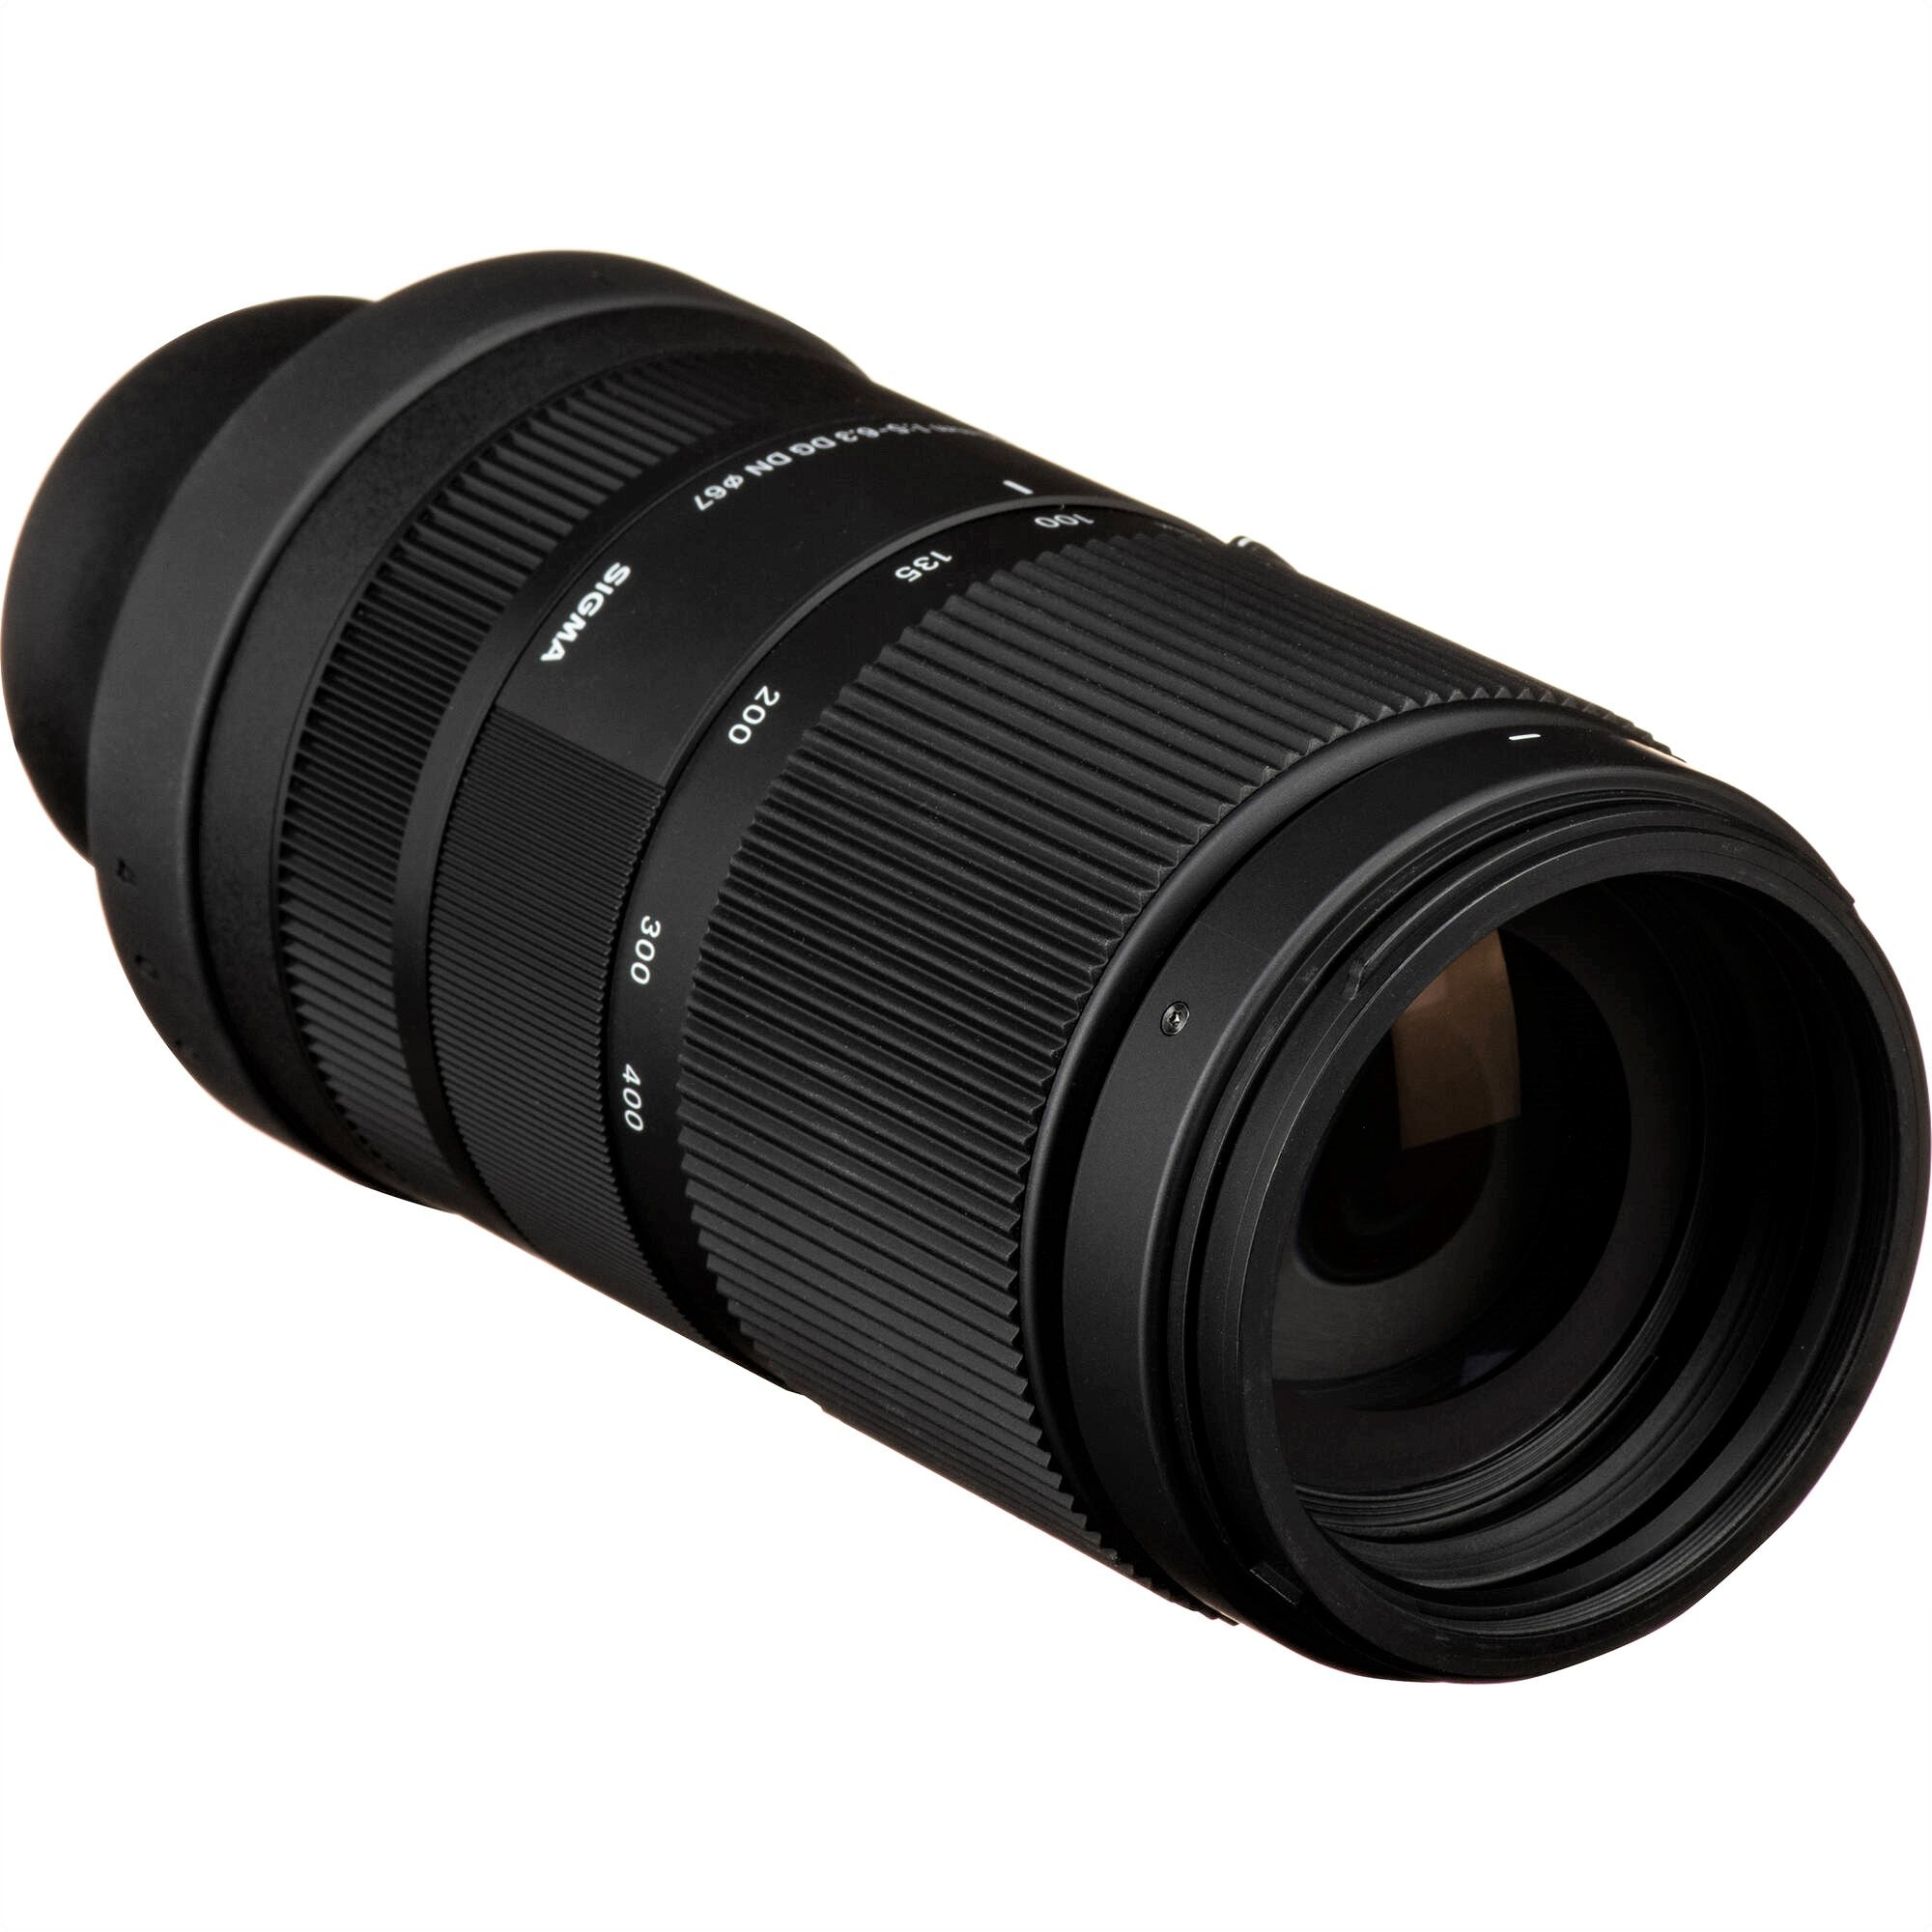 Sigma 100-400mm f/5-6.3 DG DN OS Contemporary Lens for Sony E - Front Side View